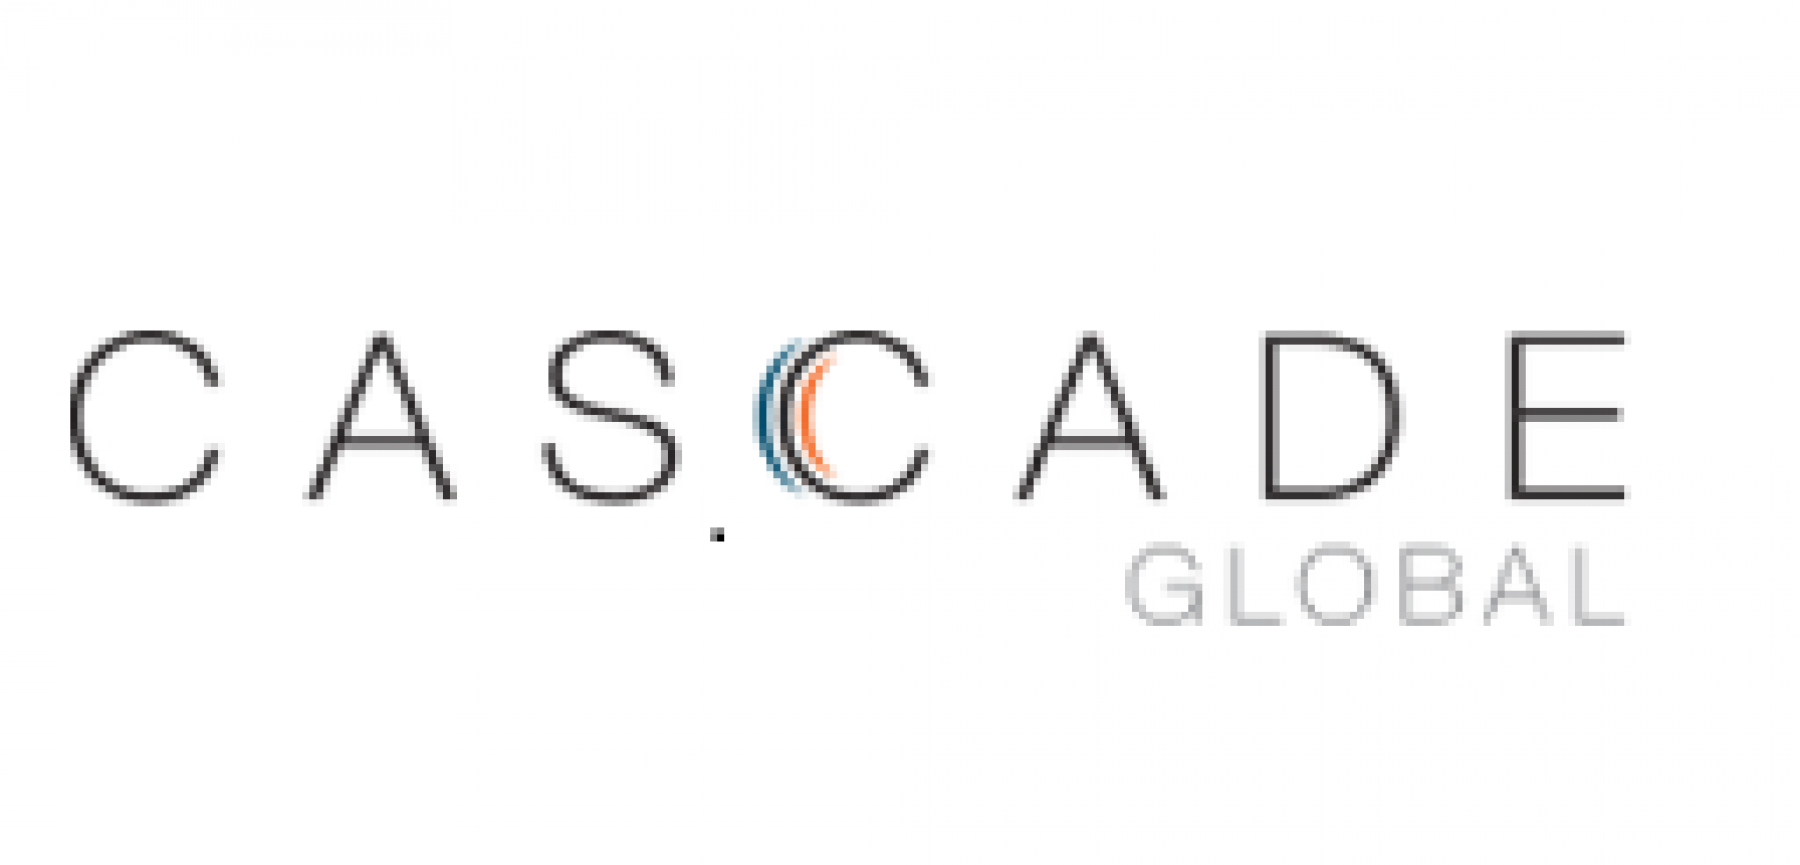 Levine Keszler advises <b>Cascade Global</b> on its acquisition of a majority stake in Team Vitality